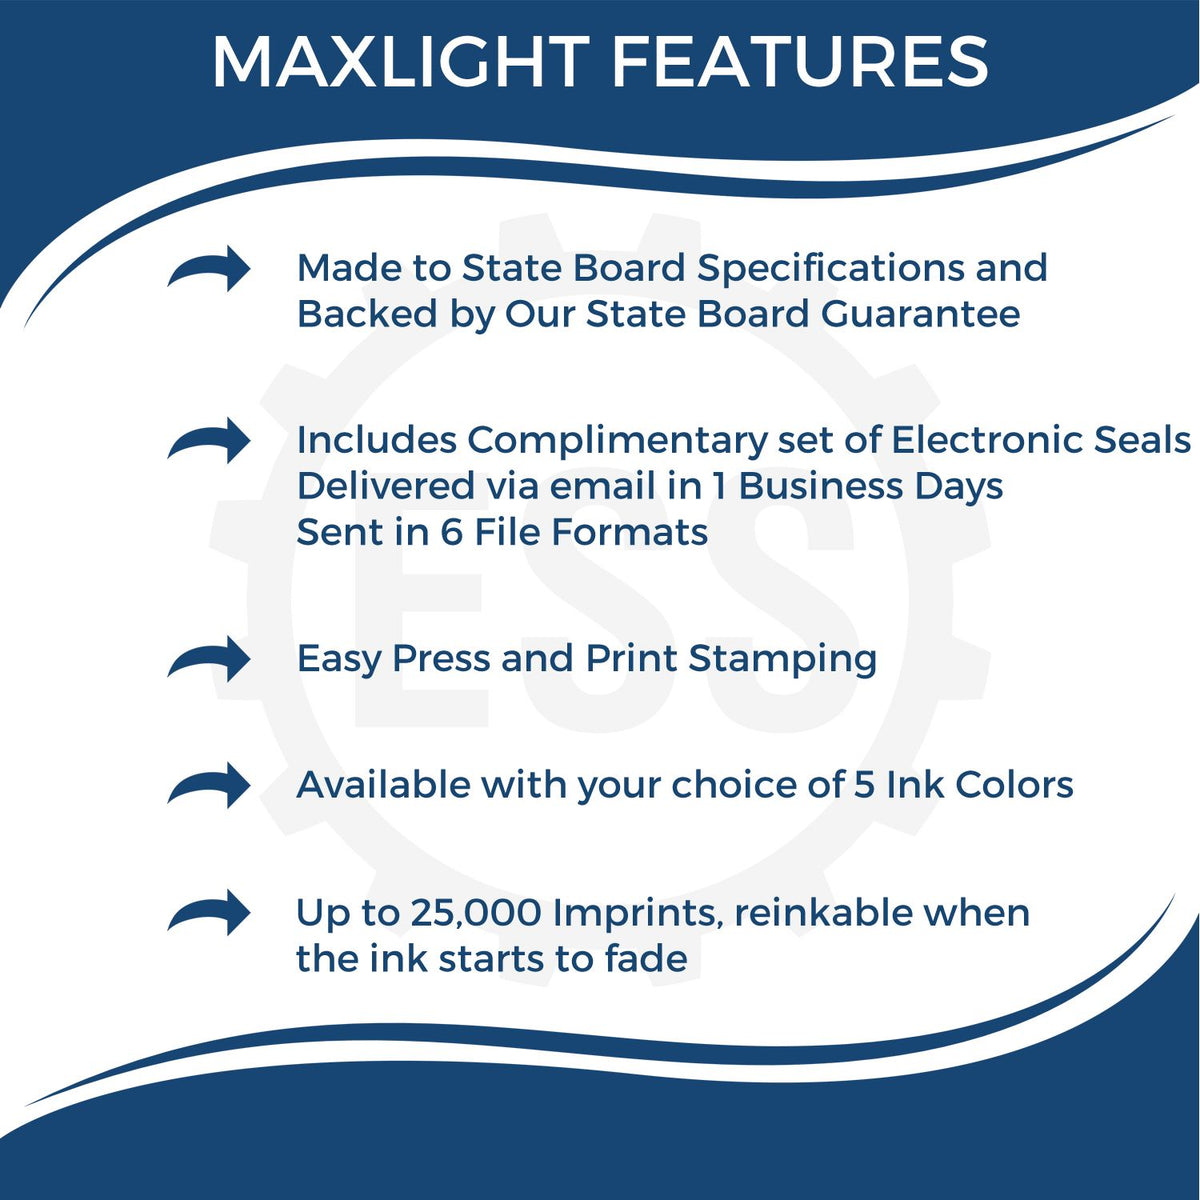 A picture of an infographic highlighting the selling points for the MaxLight Premium Pre-Inked Alabama State Seal Notarial Stamp